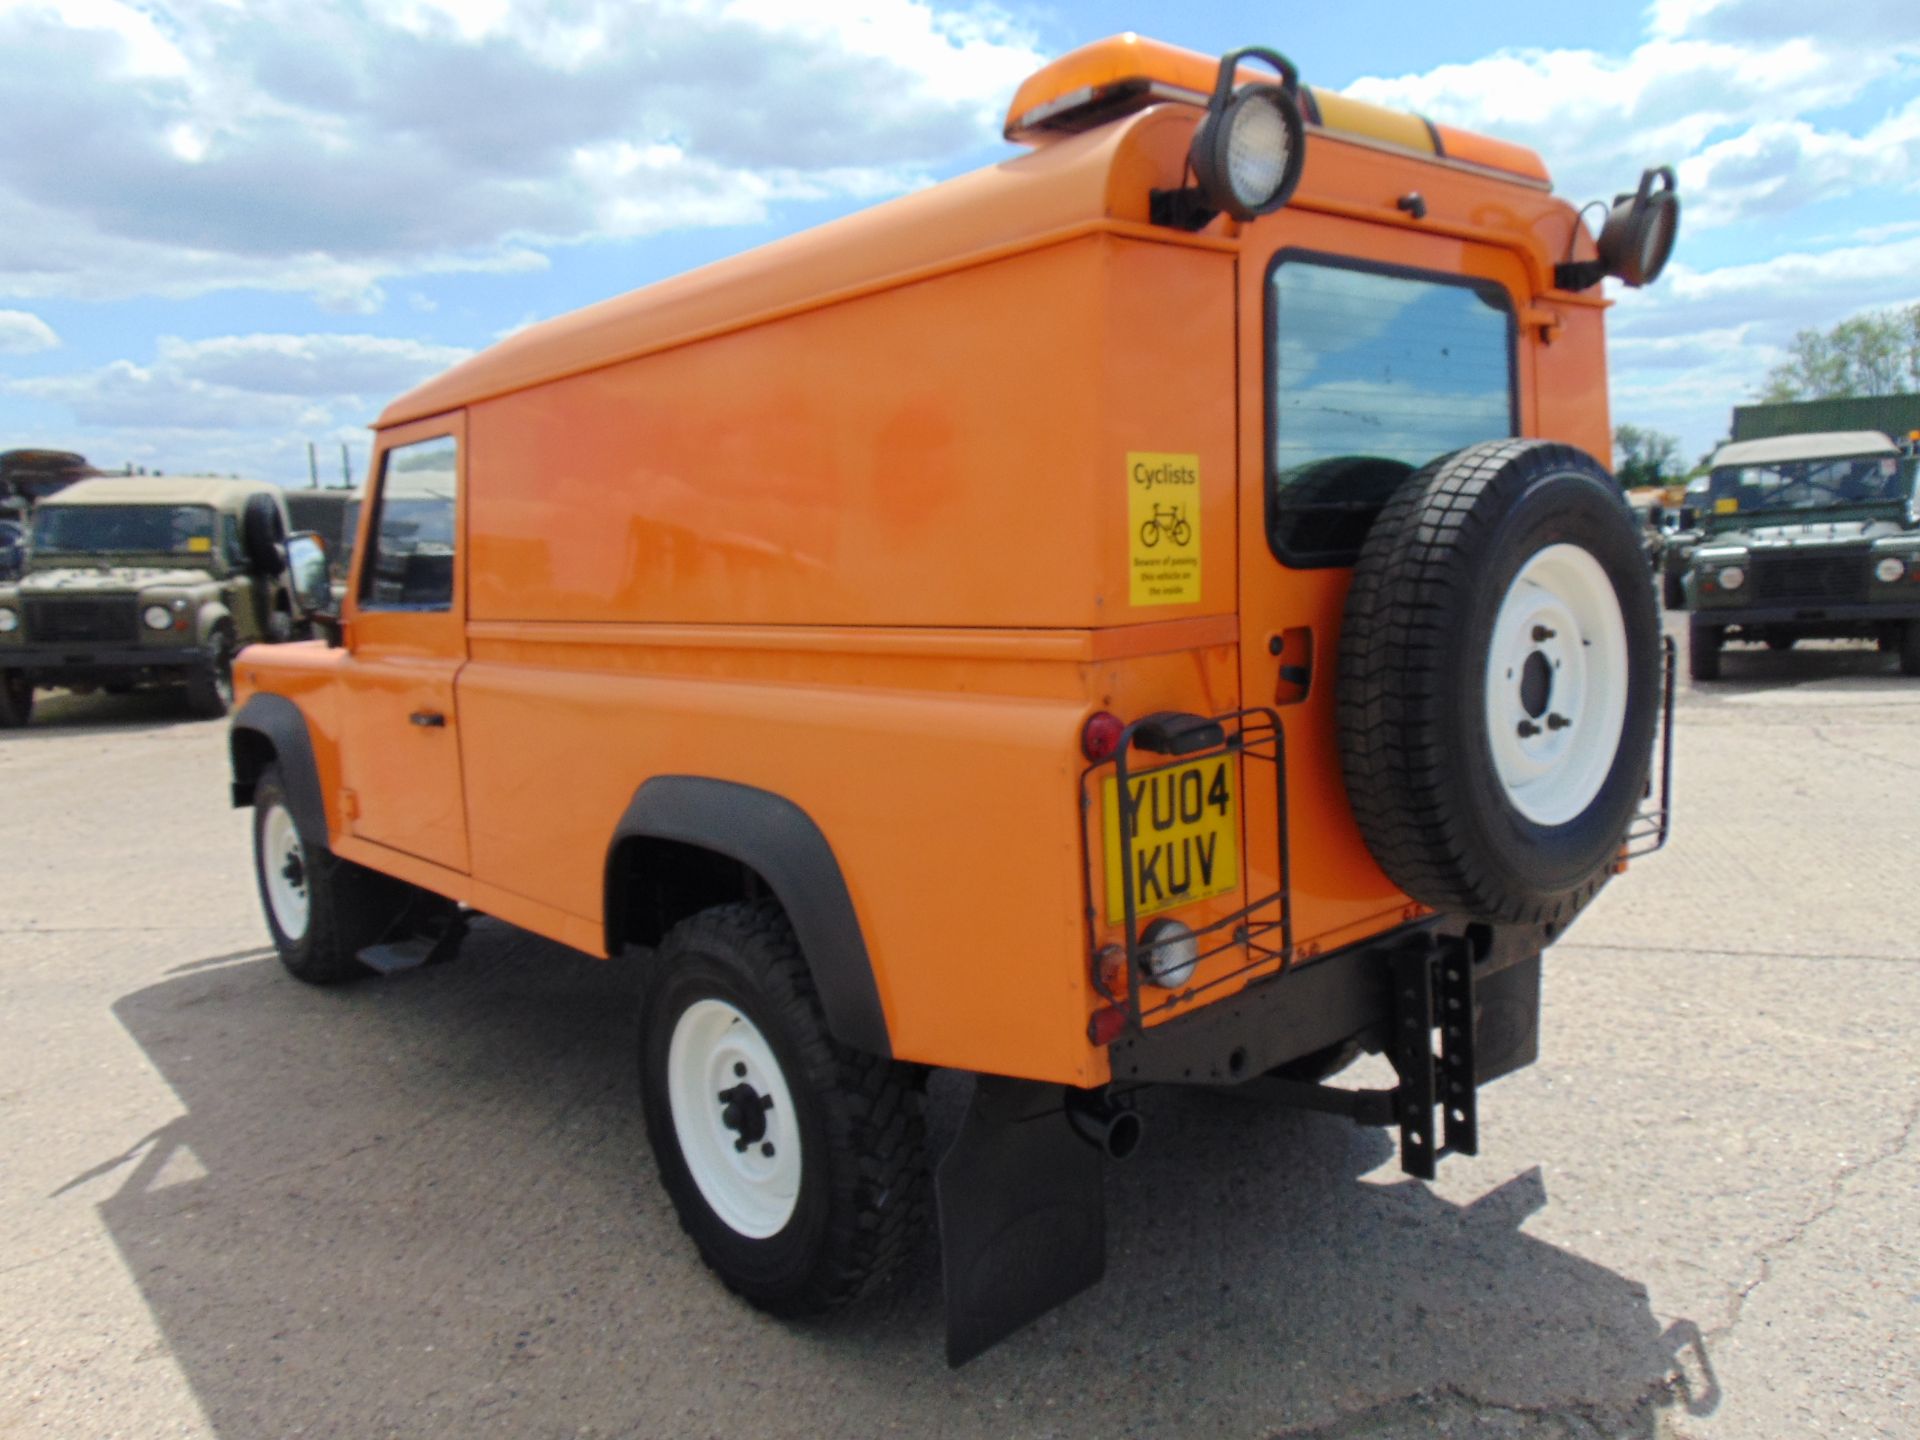 Land Rover 110 TD5 Hard Top - Image 8 of 17